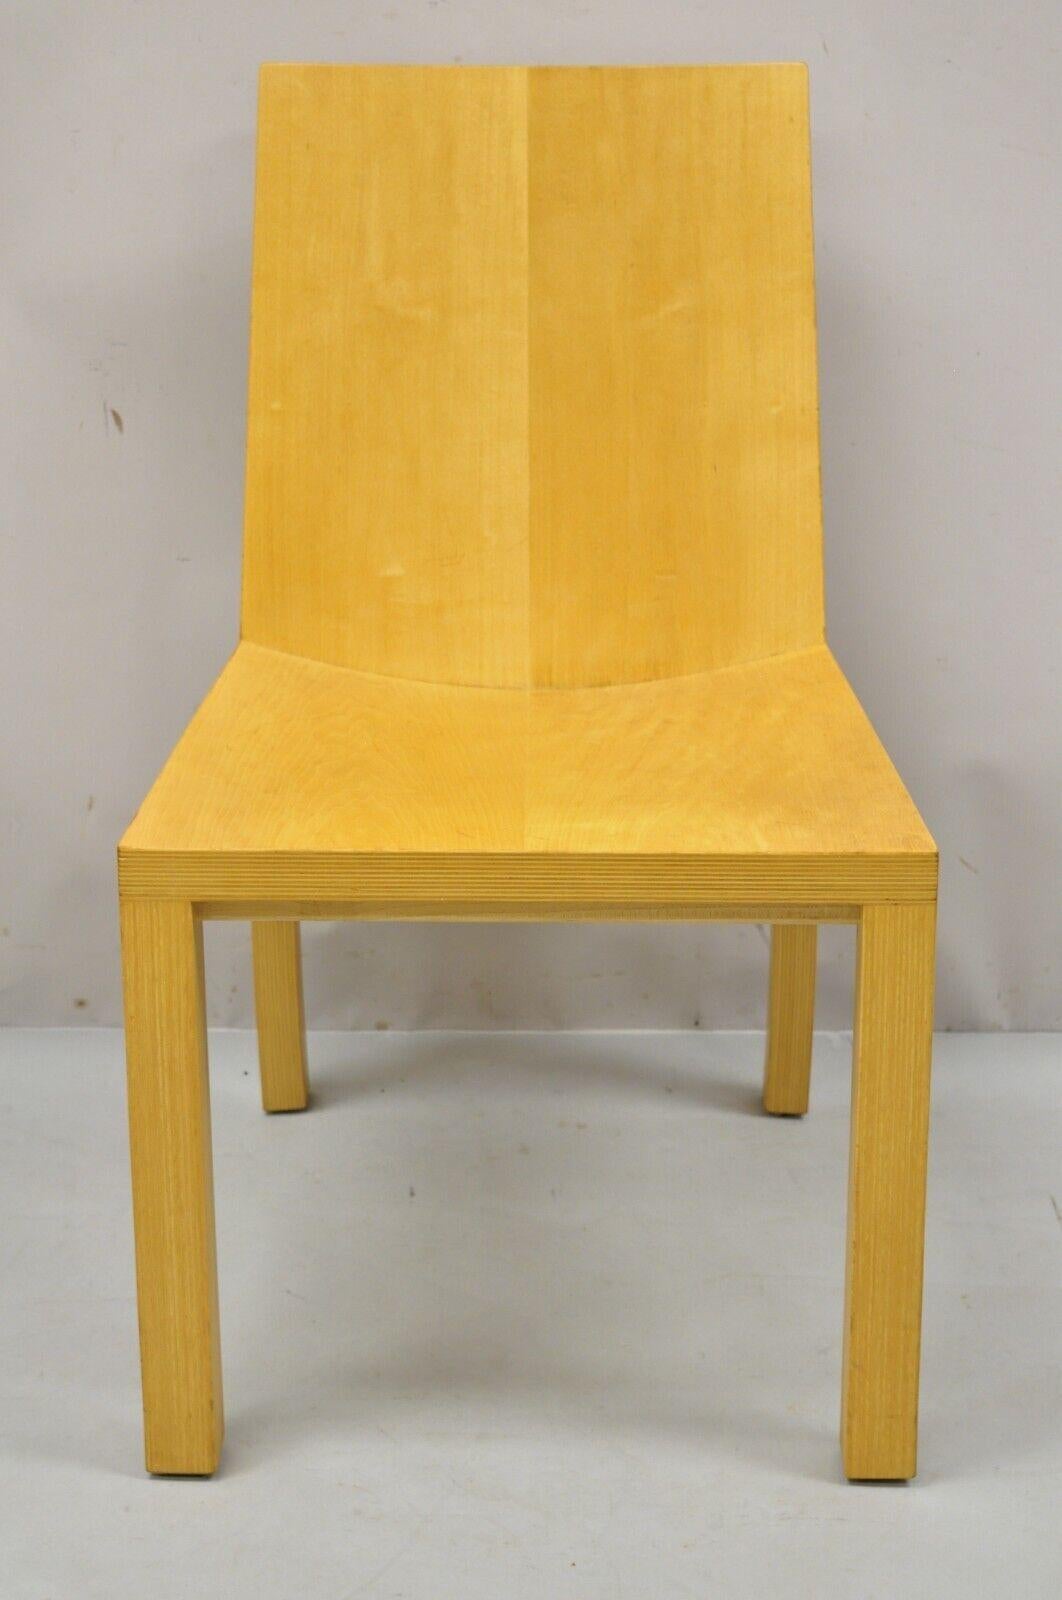 Modern Stacked Laminated Birch Beechwood Laminate Dining Chair, Set of 4 In Good Condition For Sale In Philadelphia, PA